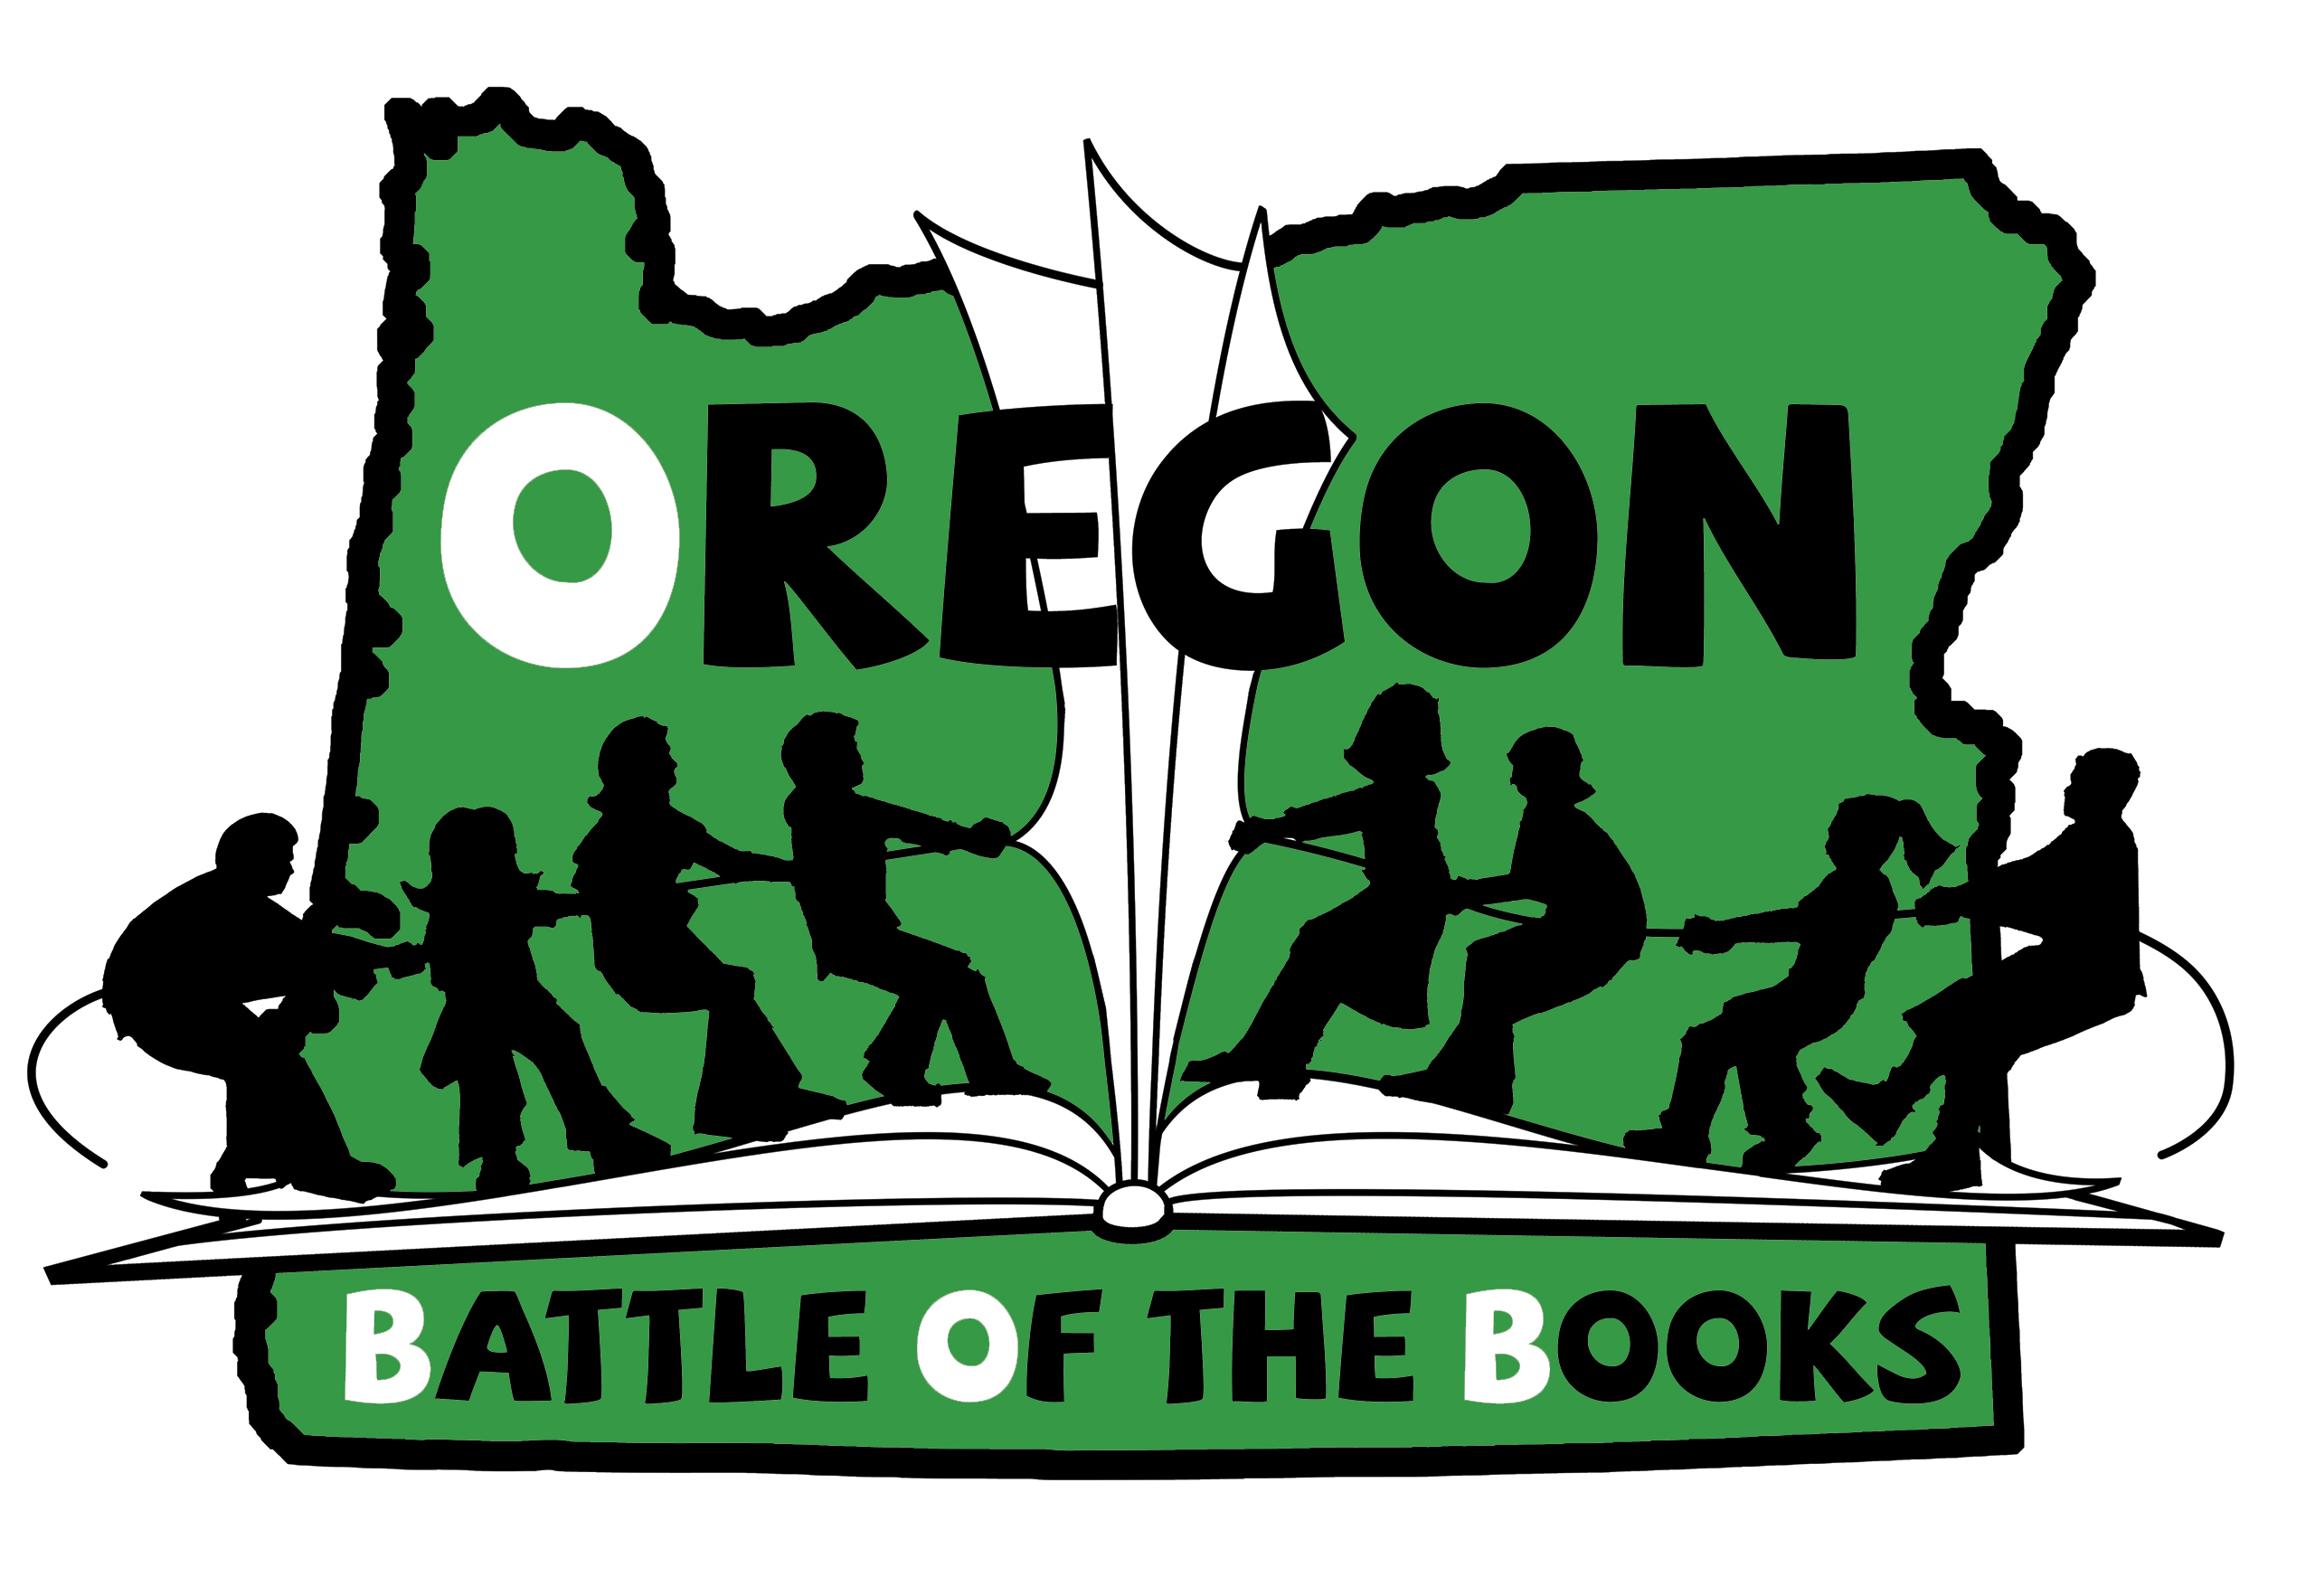 Oregon Battle of the Books logo with green background